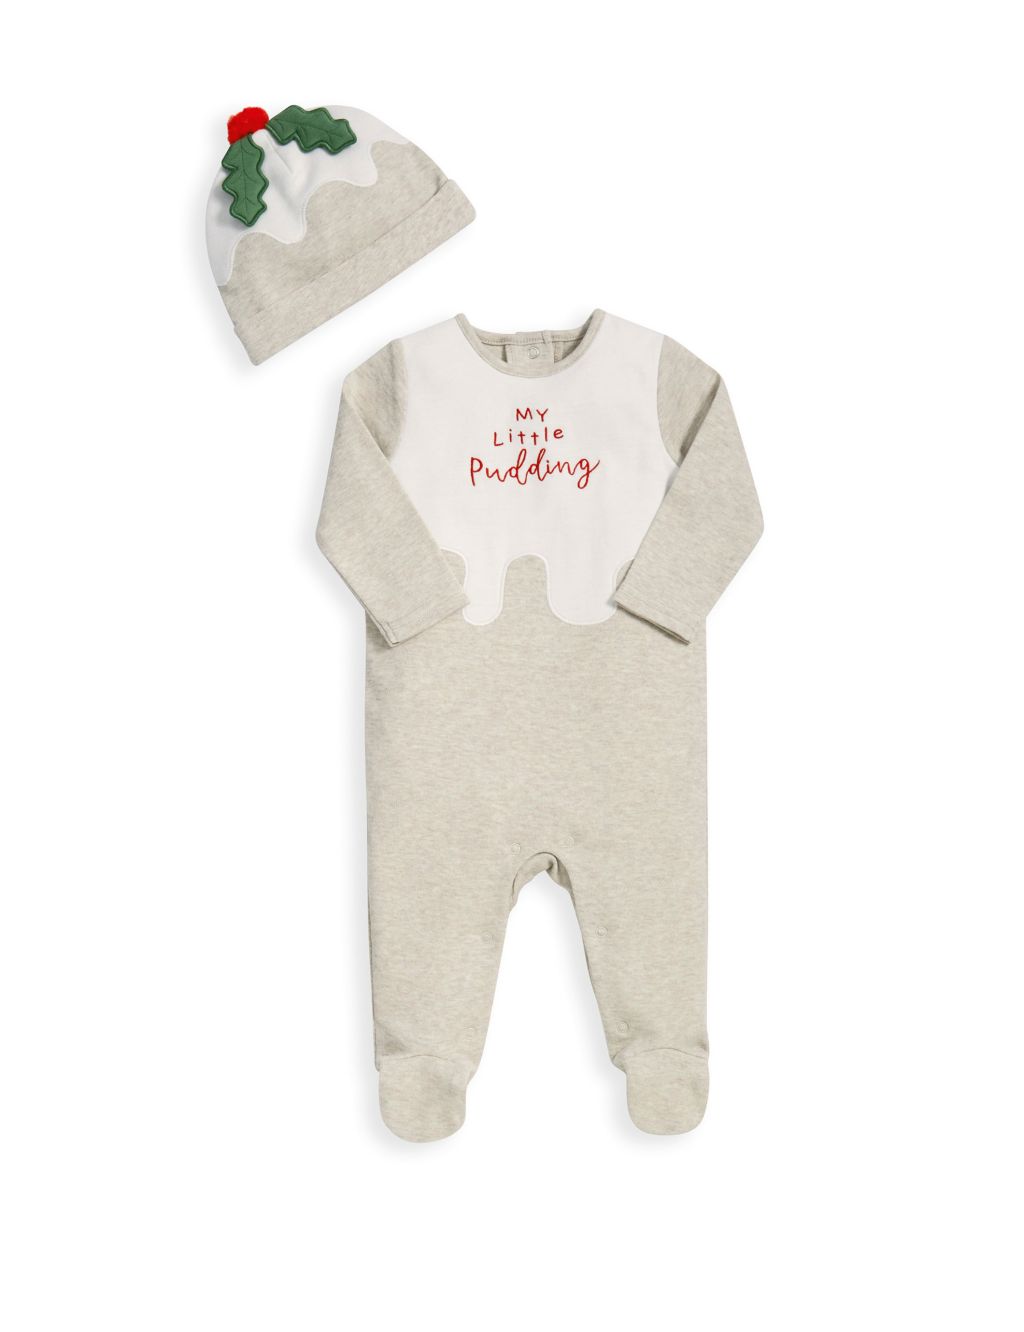 My Little Pudding Christmas All in One & Hat Set (7lbs-12 Mths) image 2